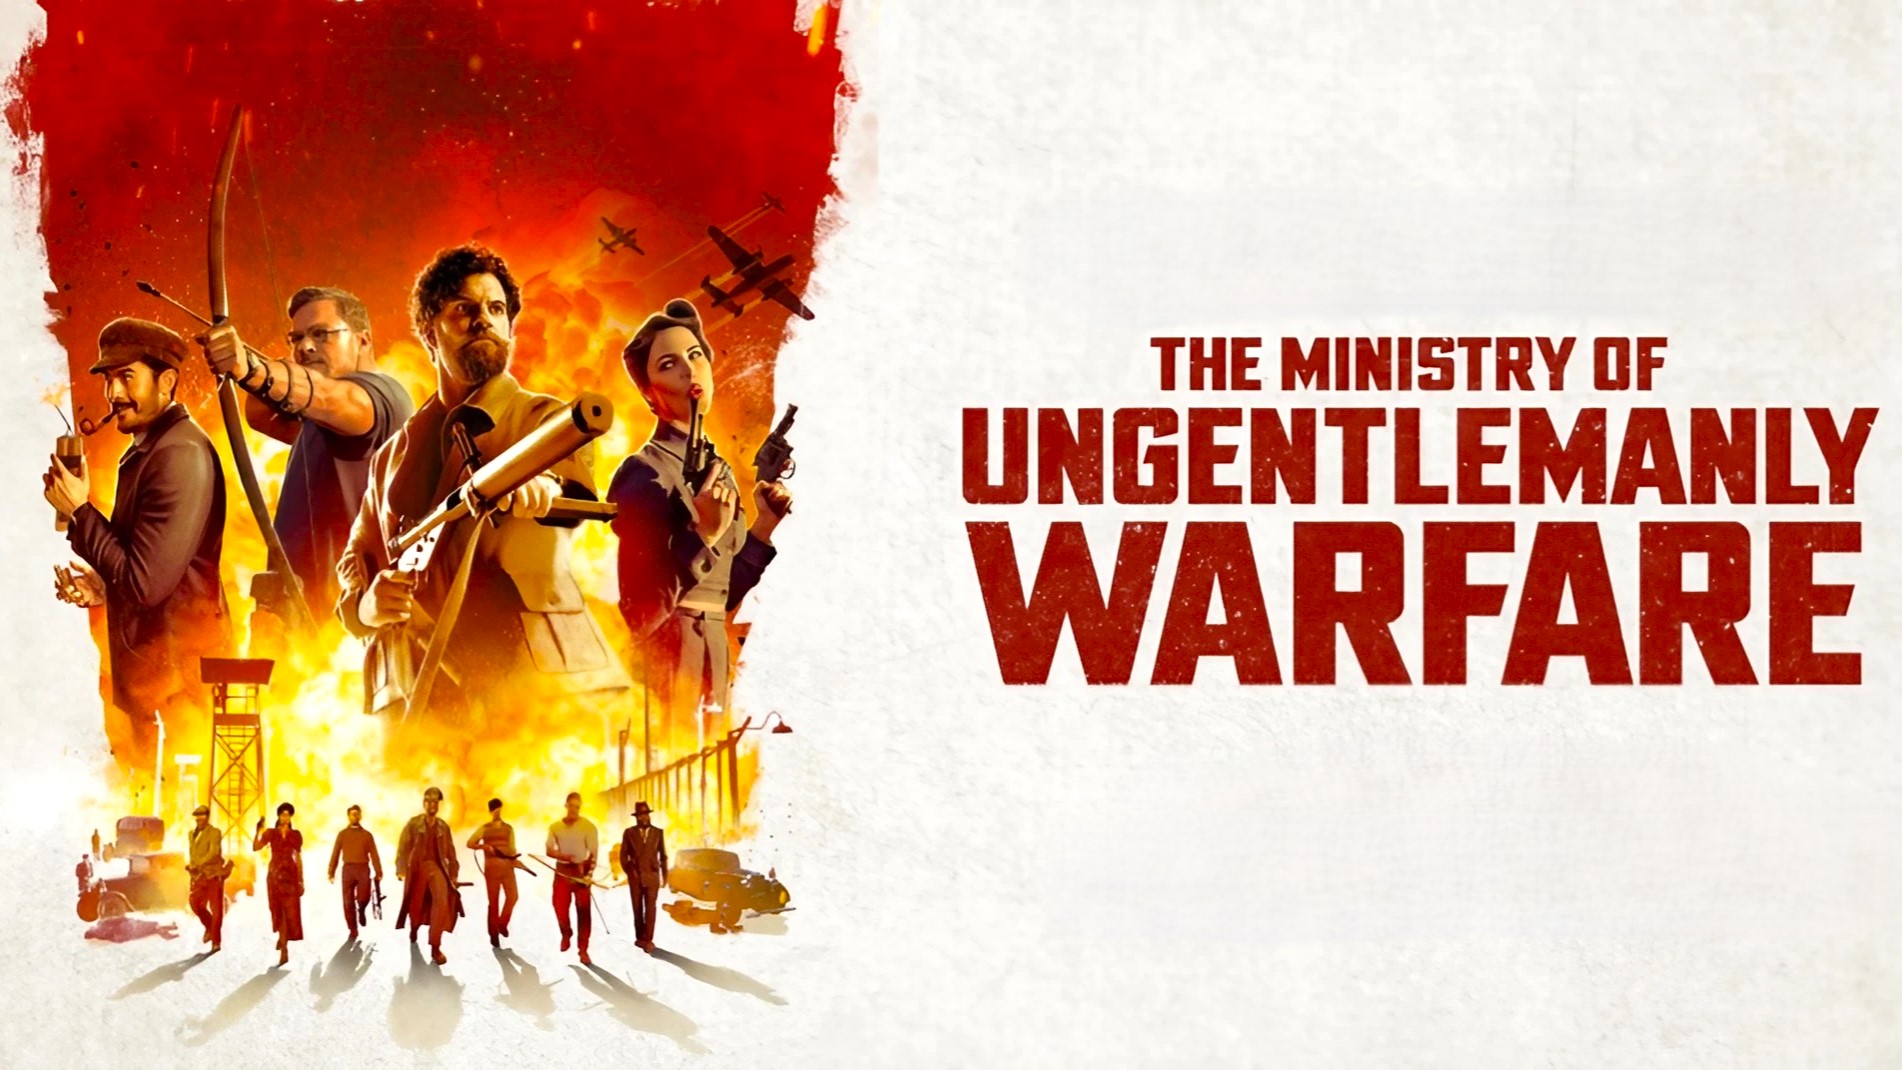 Is The Ministry of Ungentlemanly Warfare Based On A True Story?